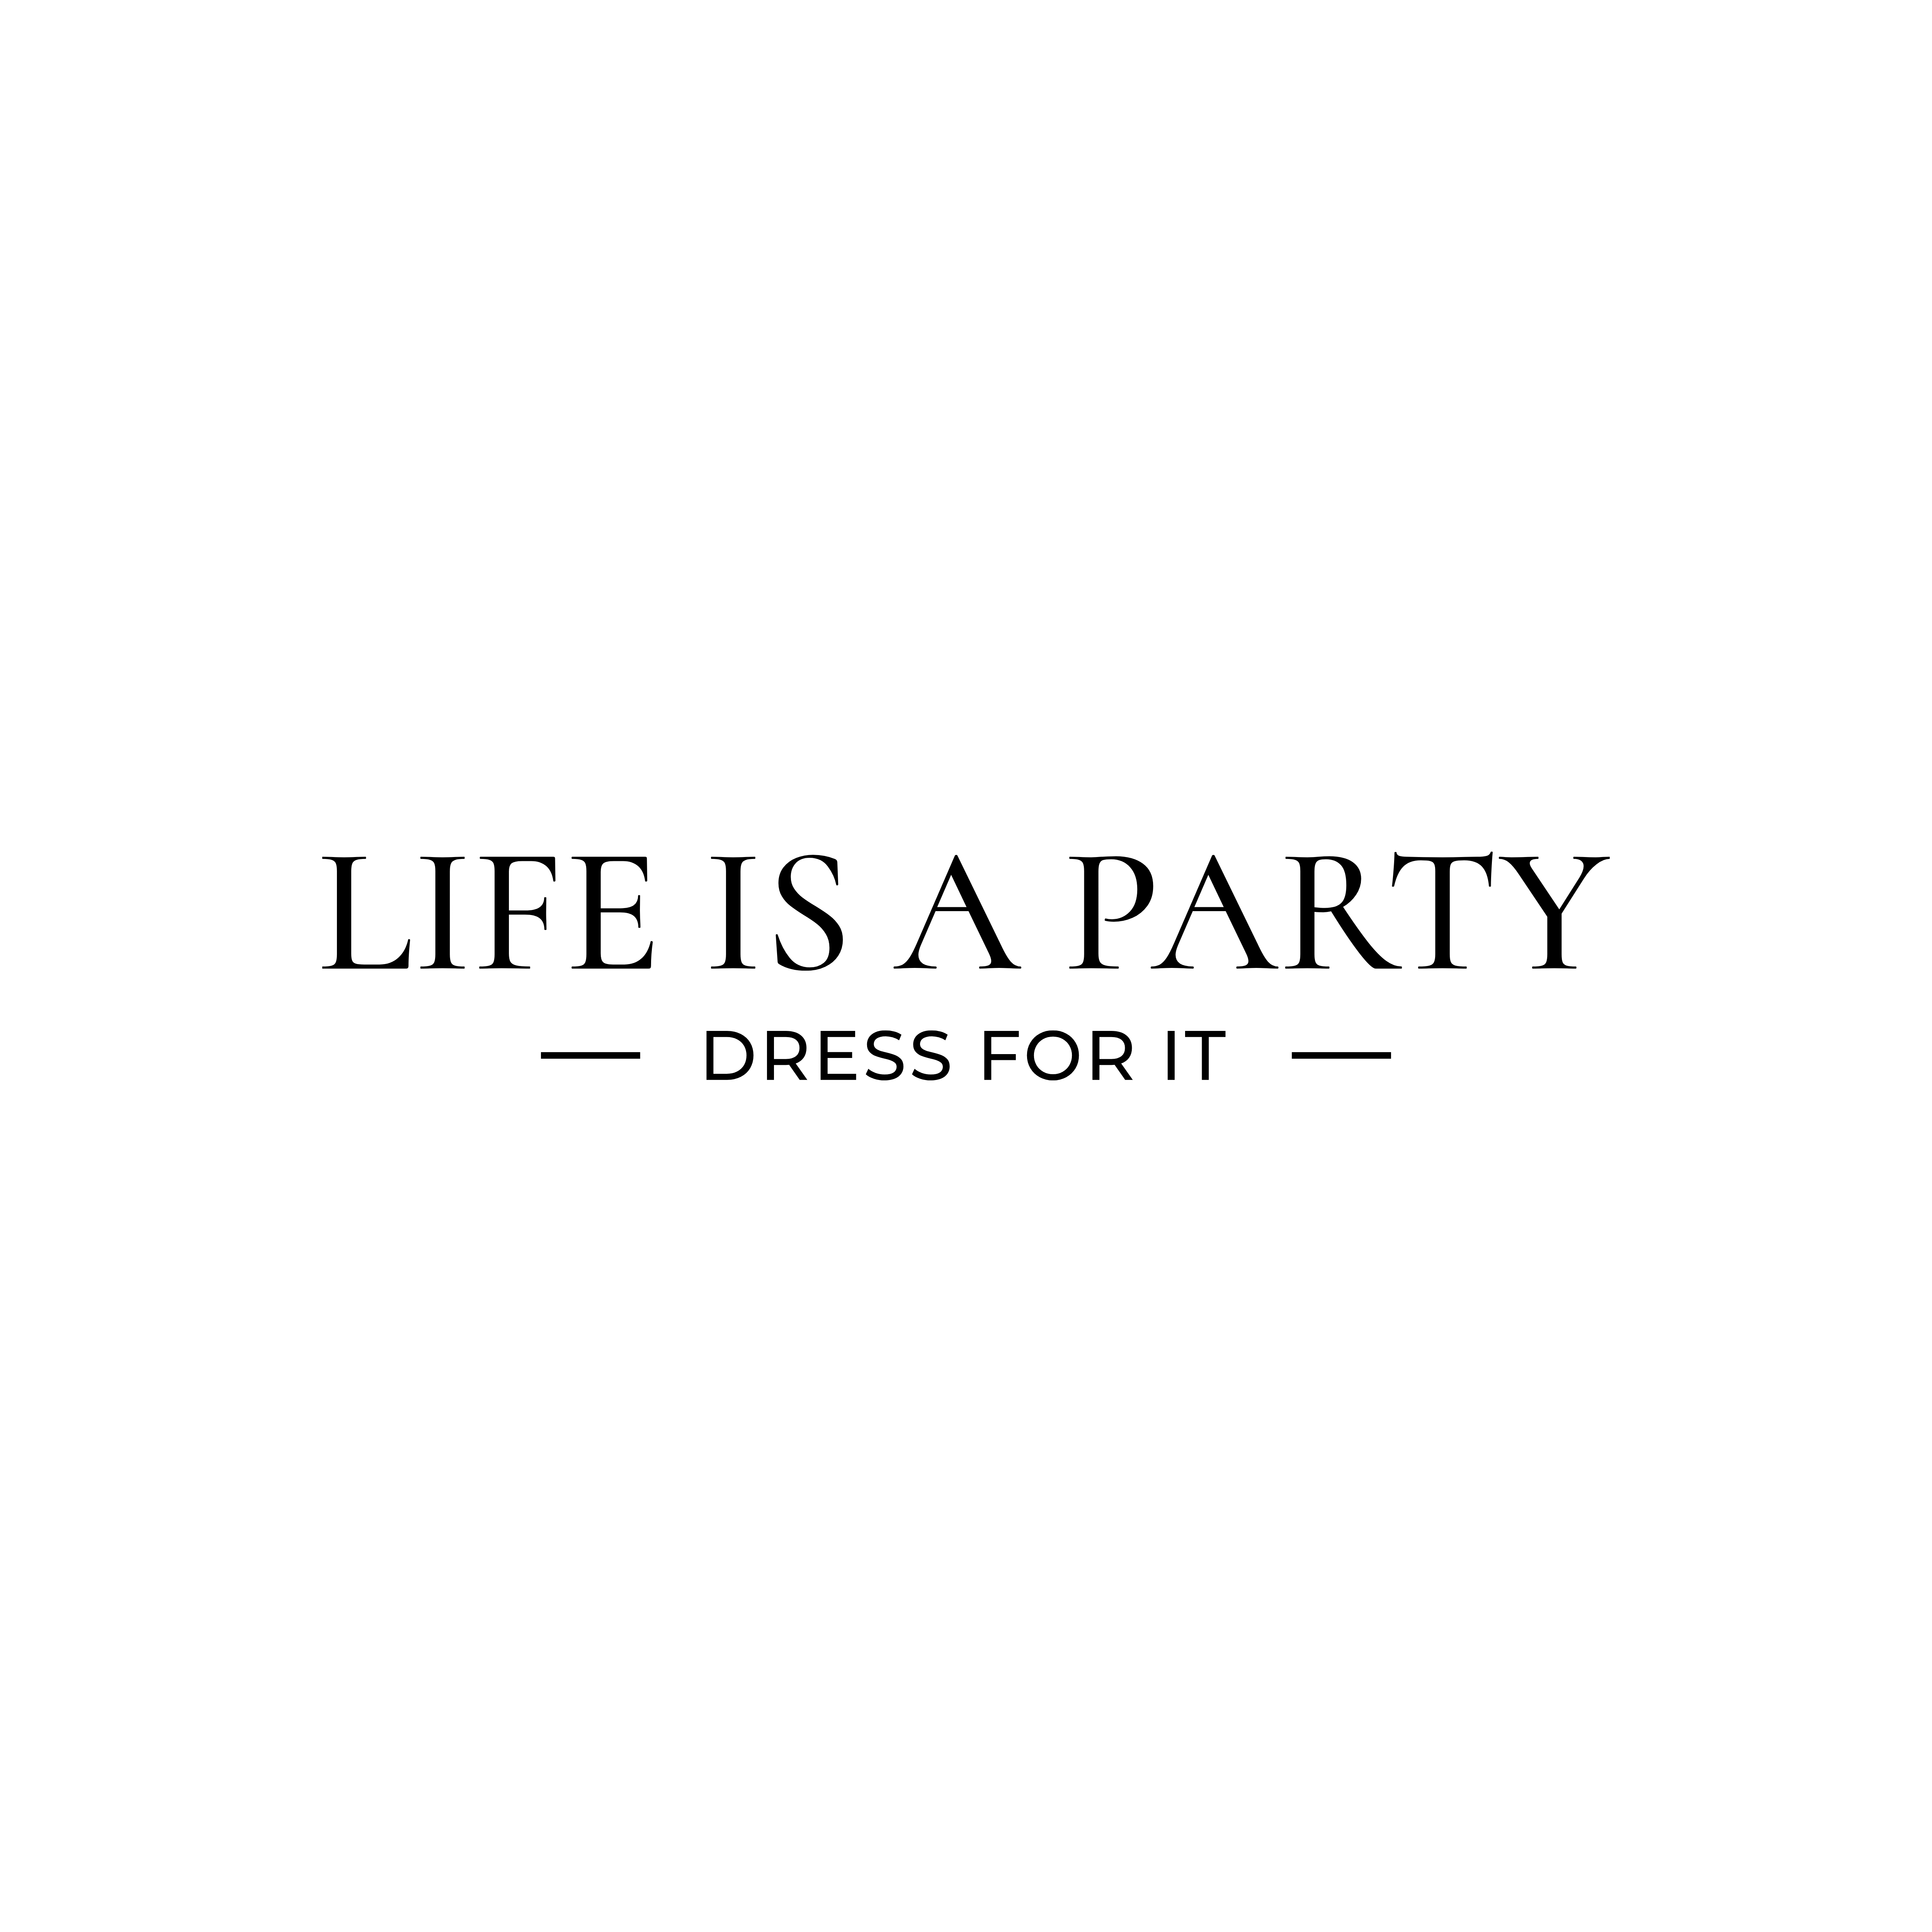 You are currently viewing Life is a Party, Dress for it